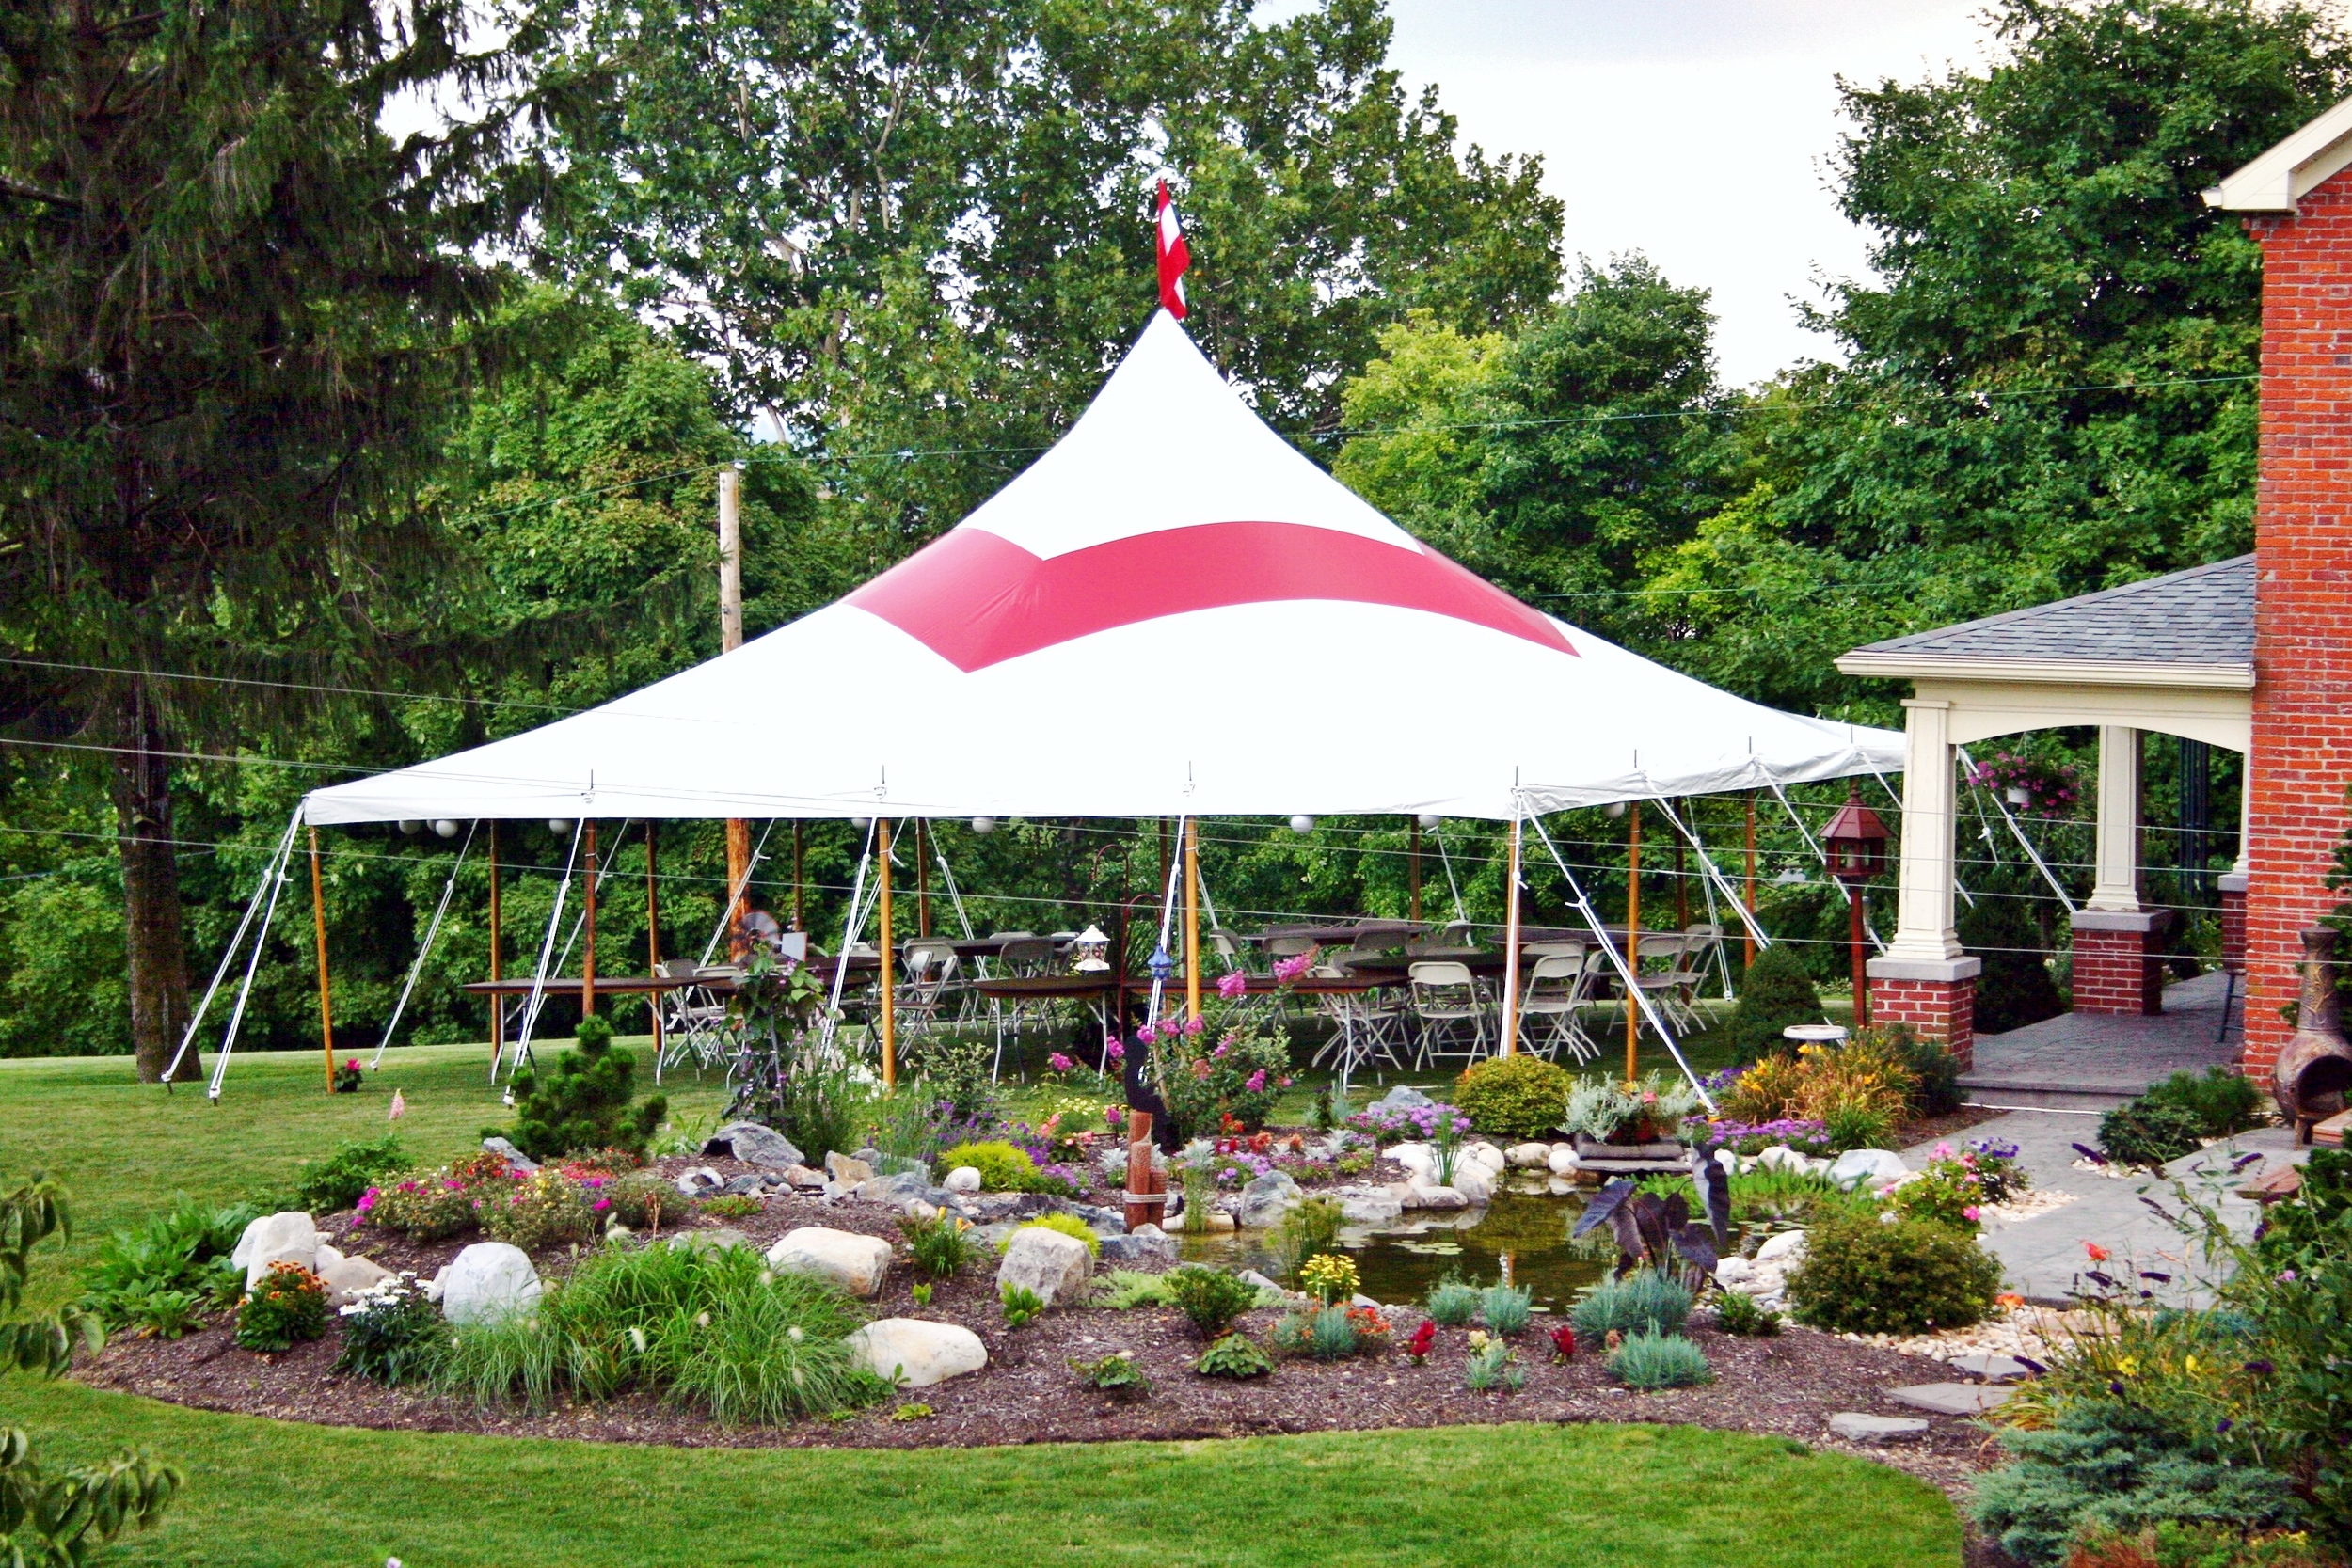 Hold your graduation party outside under a tent